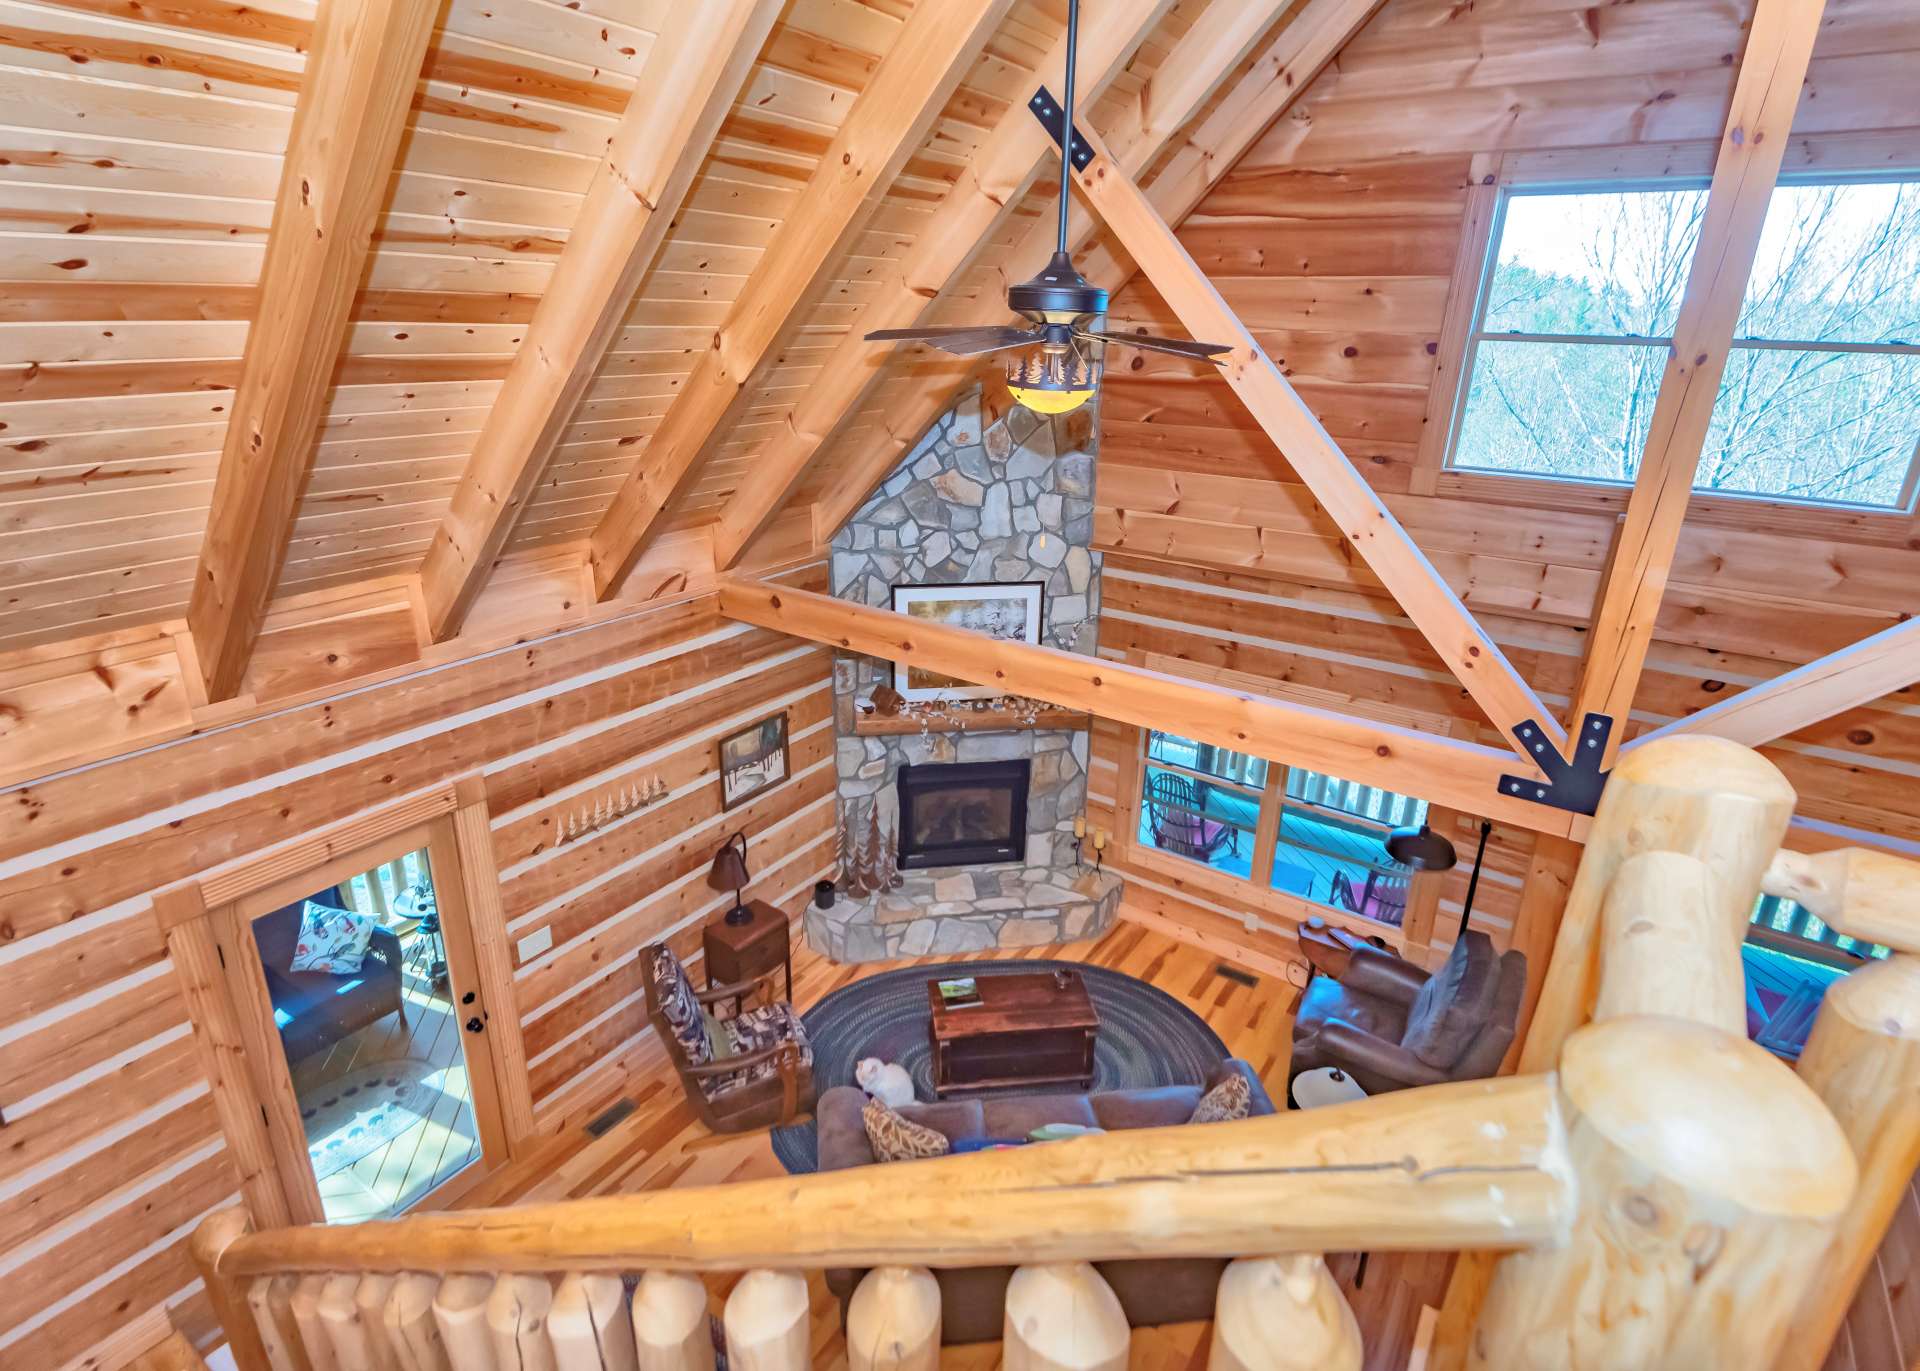 From the loft you will enjoy the majesty of the vaulted ceiling and exposed beams.